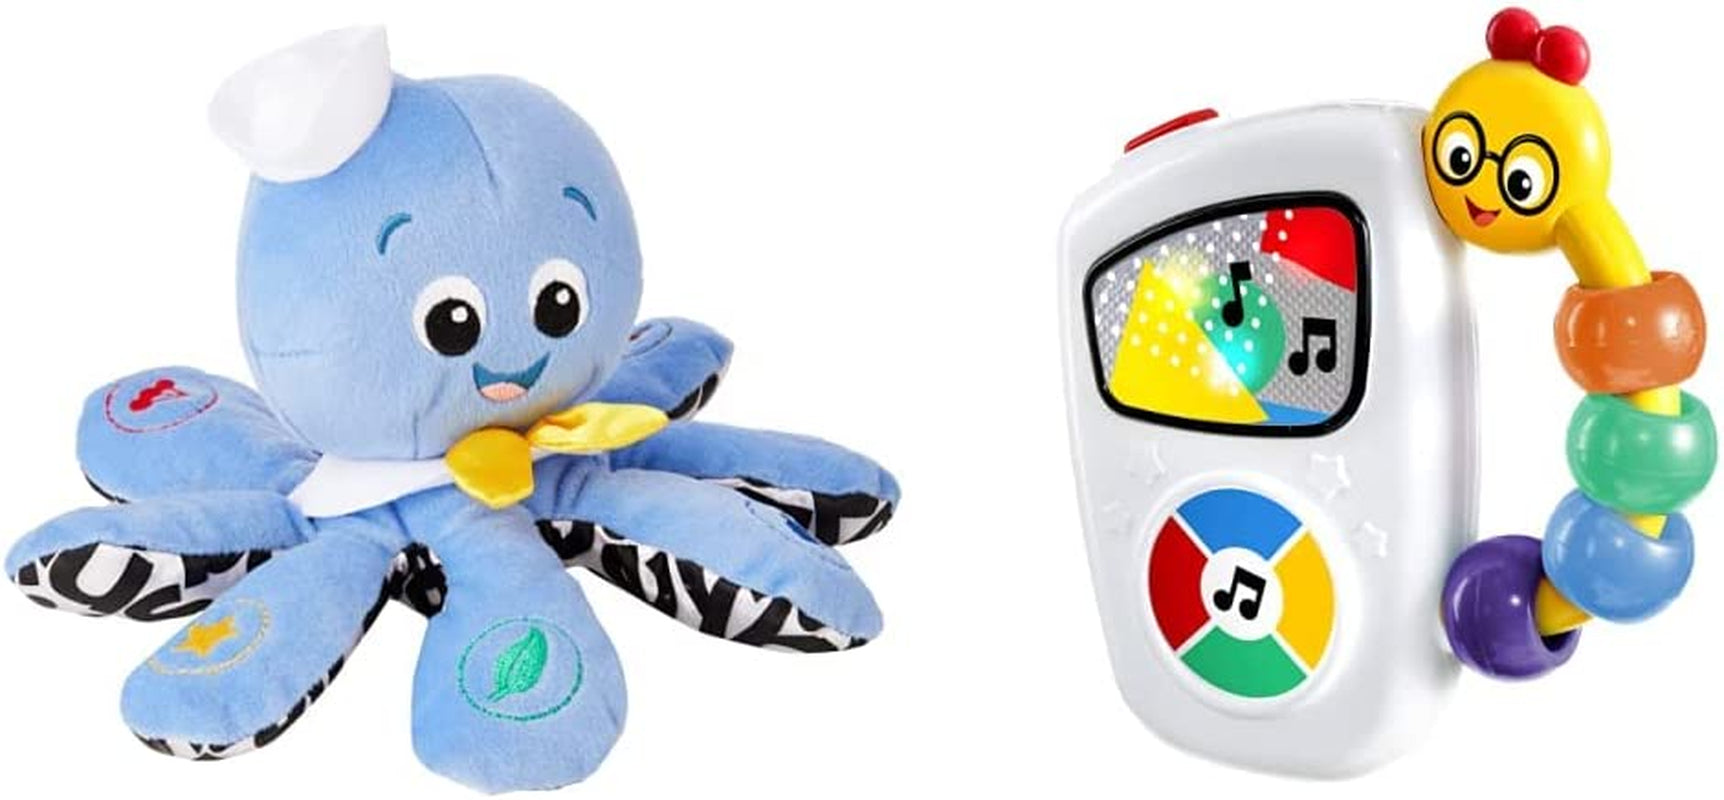 Baby Einstein, Octoplush Musical Octopus Stuffed Animal Plush Toy, 25+ Melodies & Sounds, 3 Languages, Educational Promotes Colour Discovery, Toddler Toy, with Volume Control, Age 3 Month+, Blue